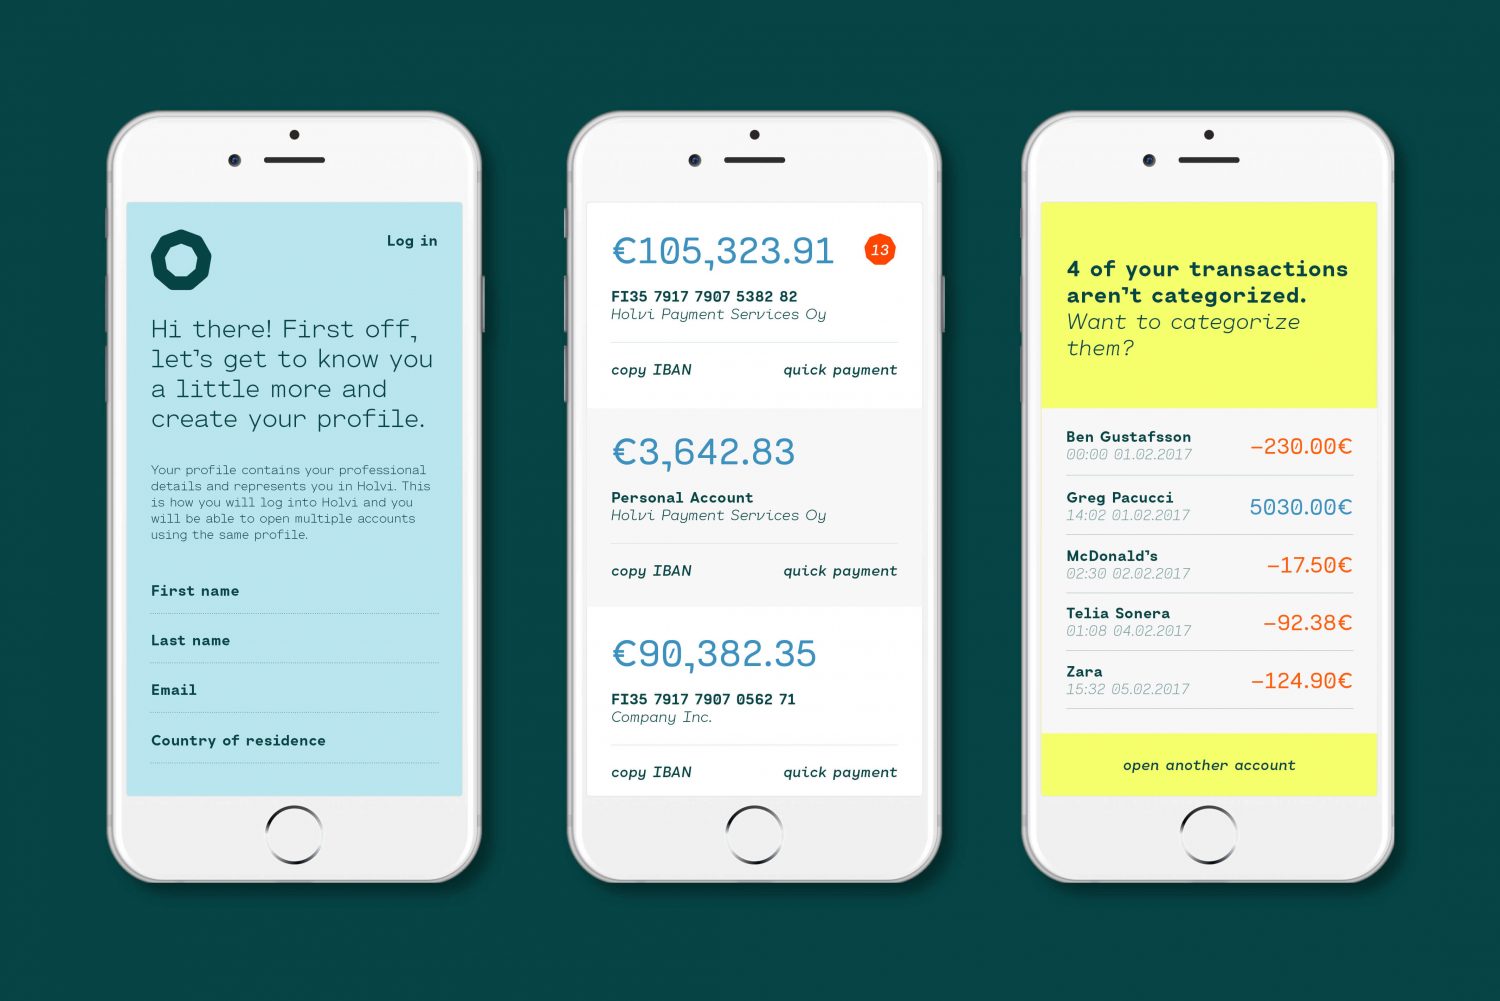 Graphic identity and app designed by Werklig for professional banking tool Holvi